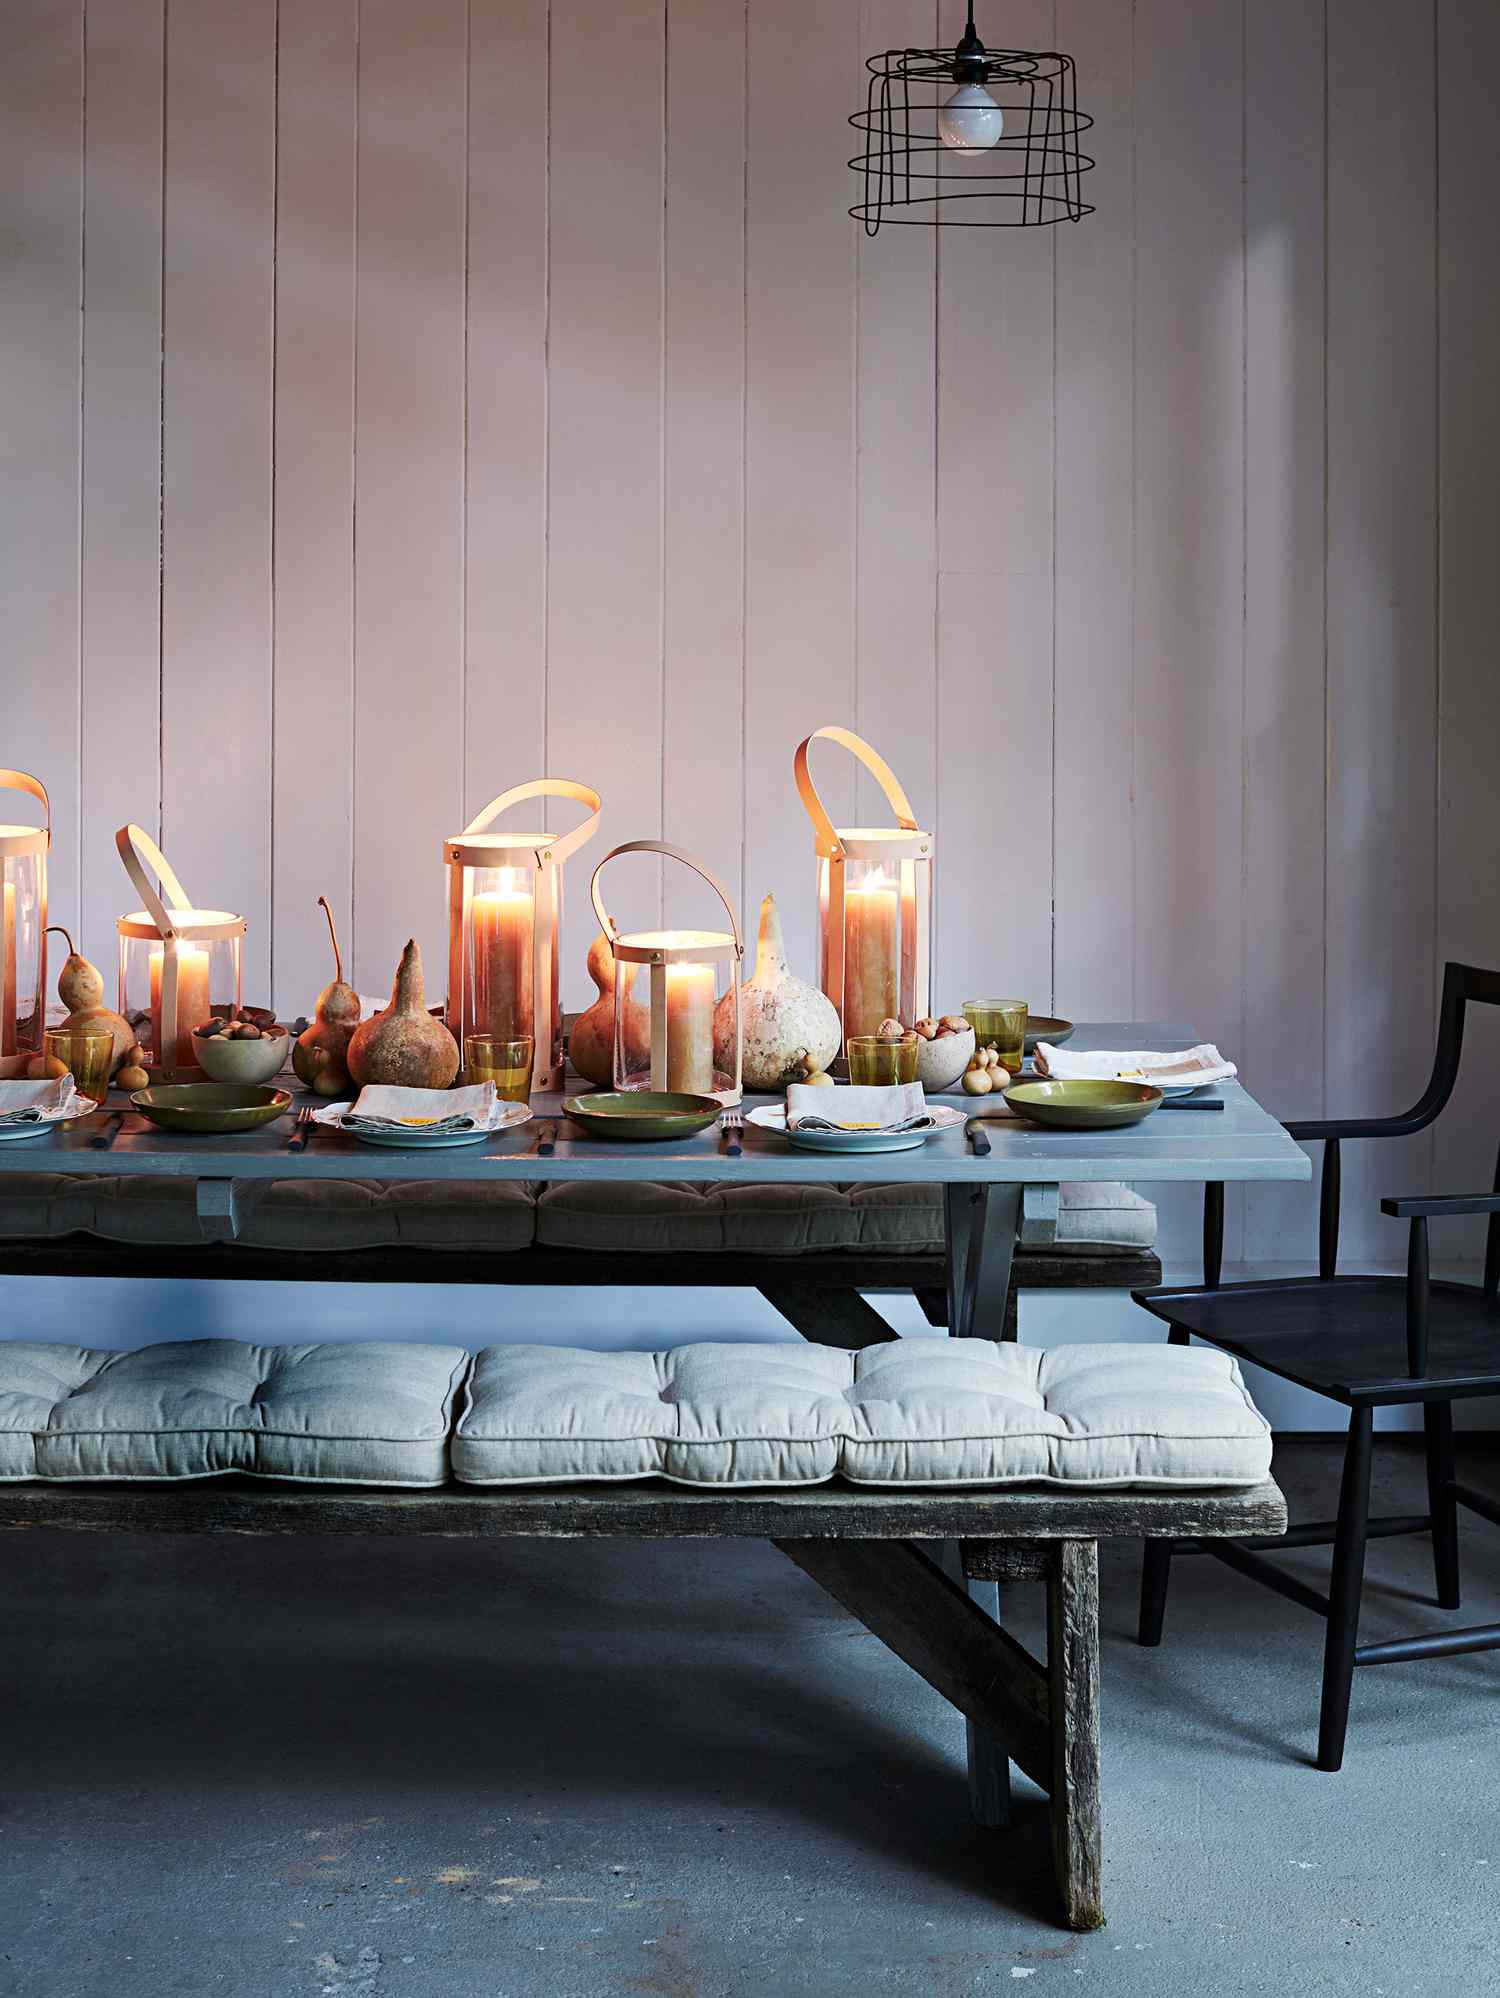 Thanksgiving Tables with Fall Decor